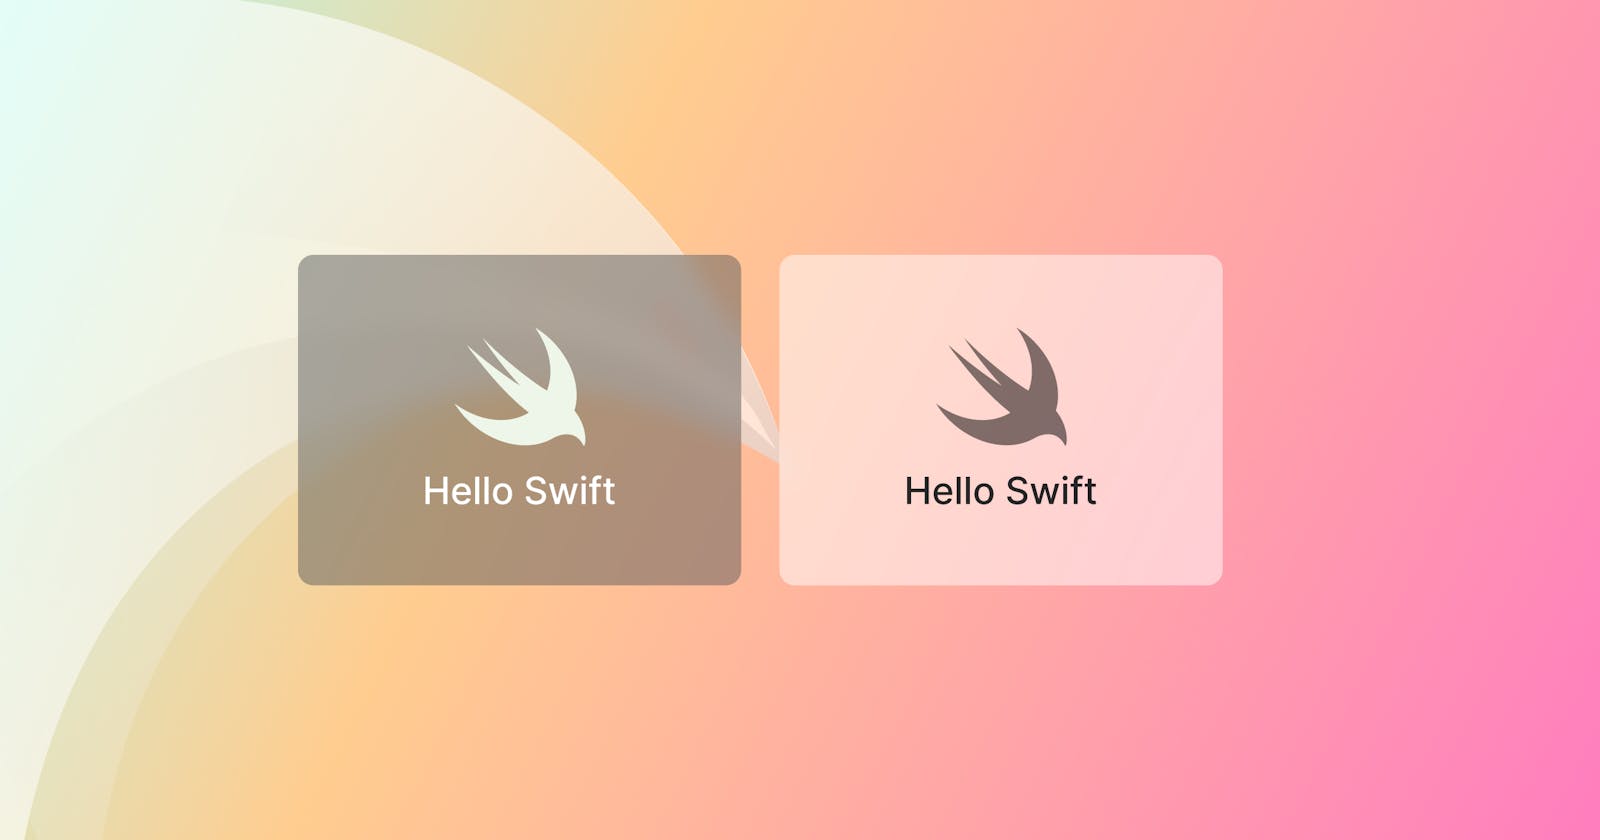 Visual Effect in SwiftUI